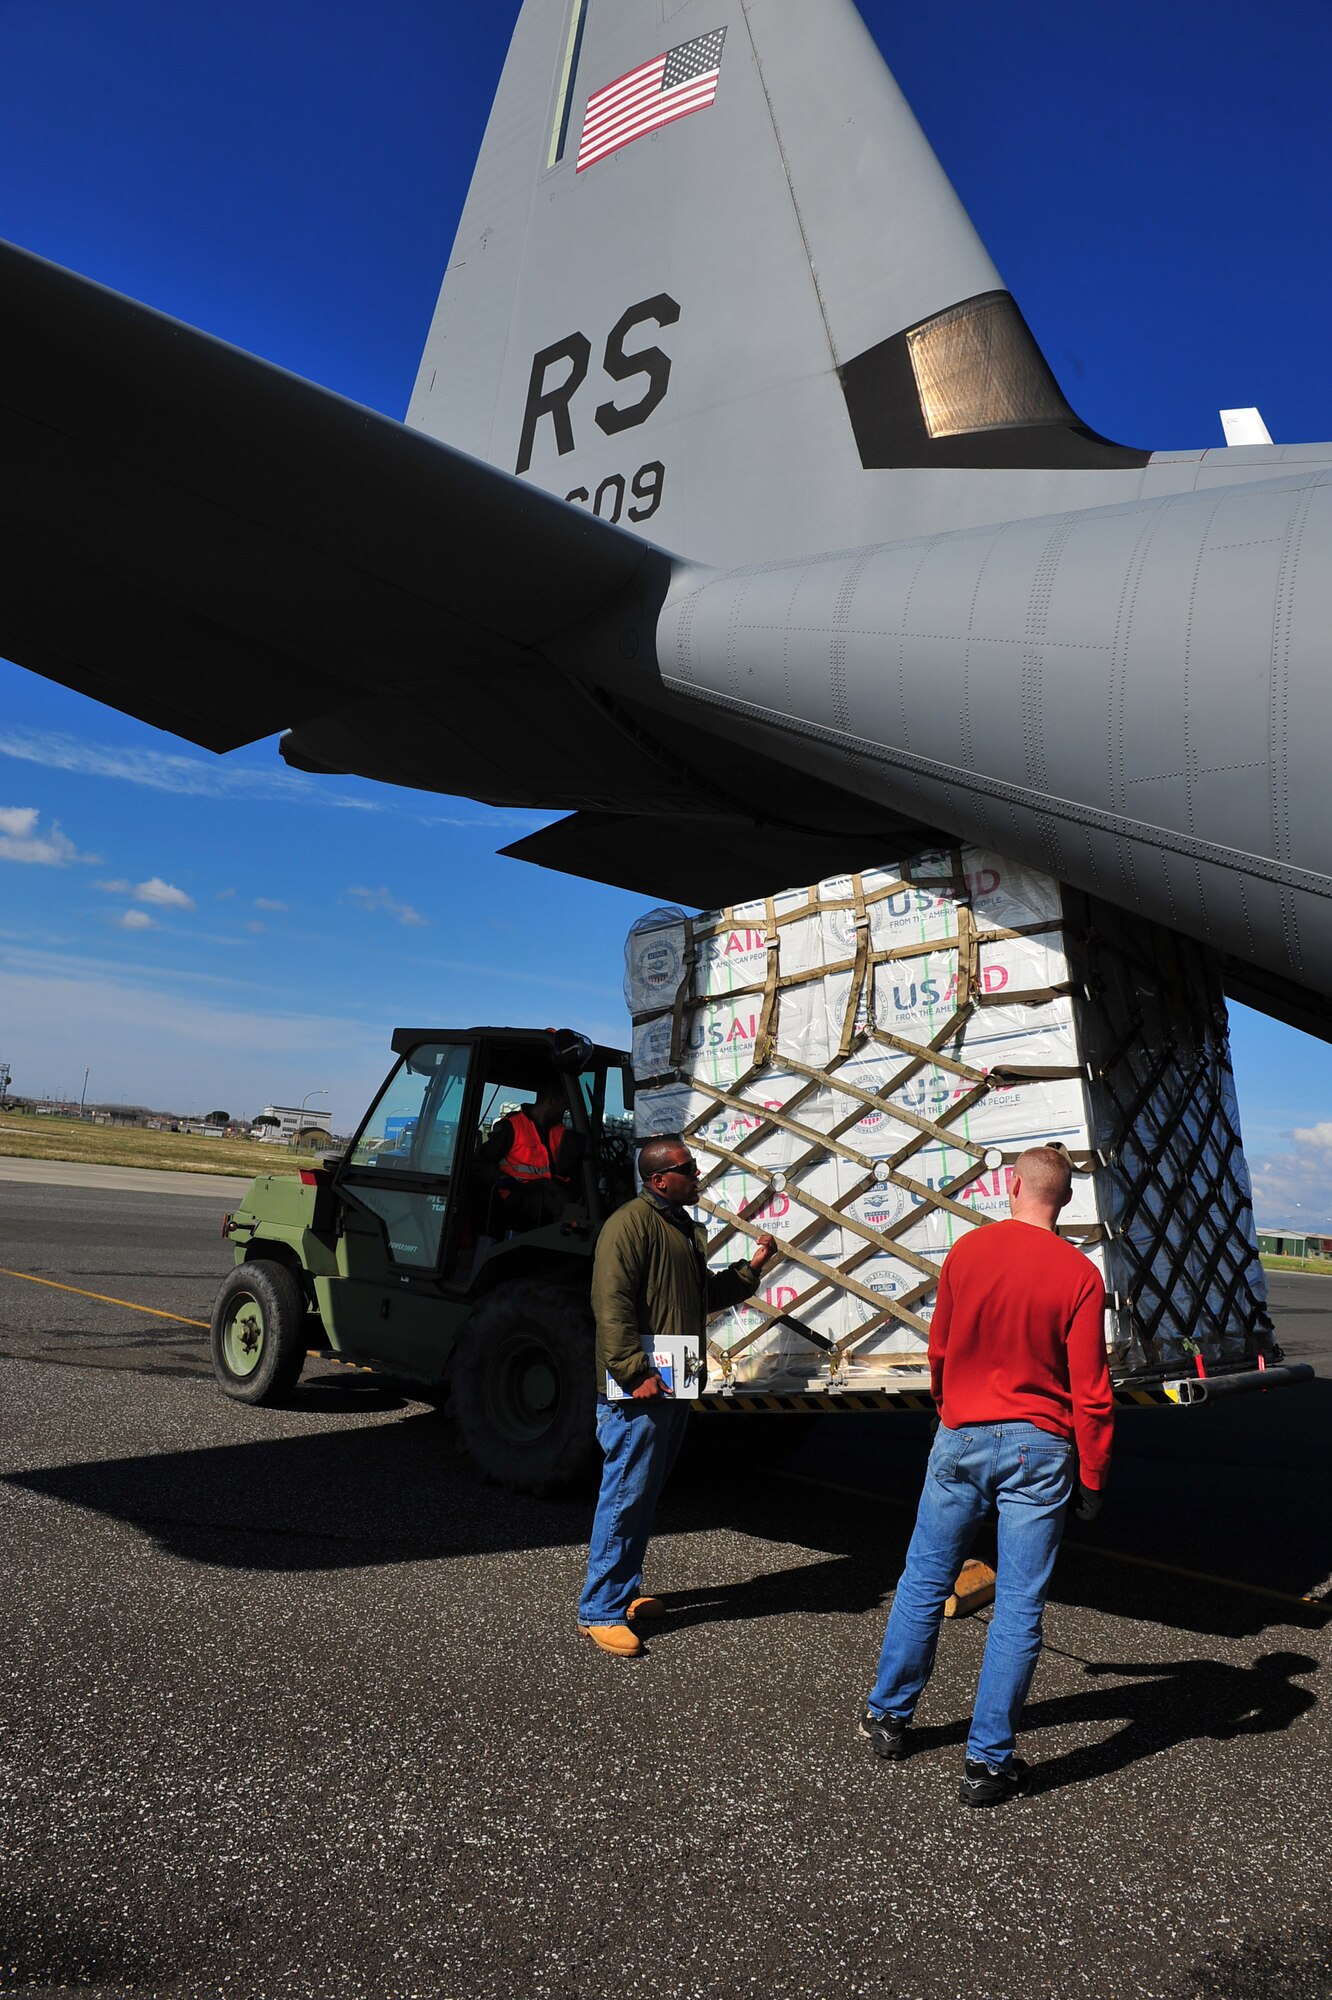 U.S. Airmen from the 435th Air Mobility Squadron, from Ramstein Air Base, picked up blankets, tarps and water containers from the U.S. Agency for International Development to load onto C-130 aircraft in Pisa, Italy. The Air Force will fly the supplies to Tunisia as part of the U.S. government's work with the international community to meet the humanitarian needs of the Lybian people and others in the country who fled across the borders during political unrest. (U.S. Army photo by Staff Sgt. Brendan Stephens)   
